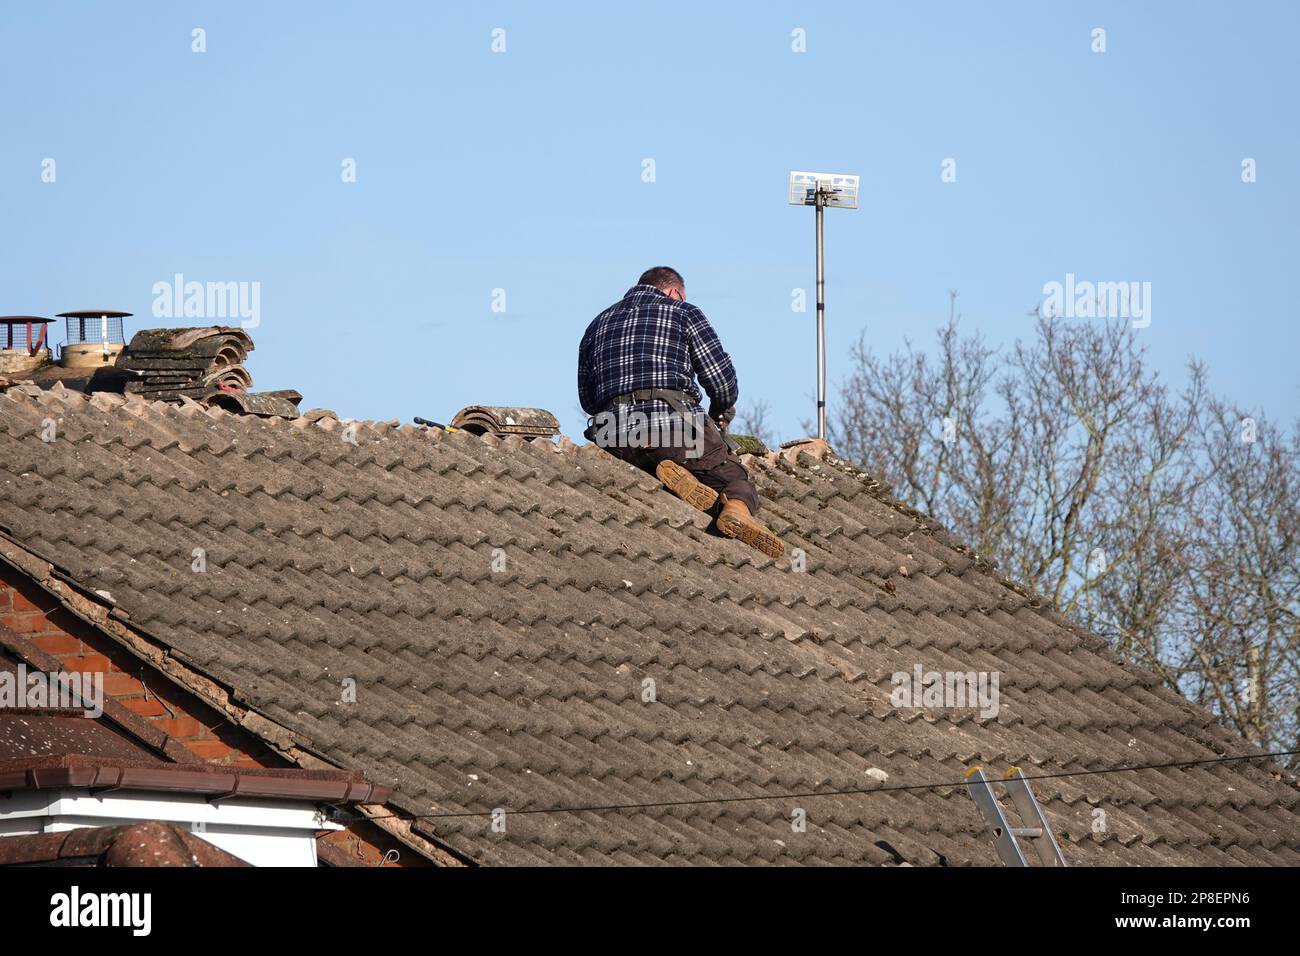 A roofer repairing ridge tiles on the roof of a domestic house Stock Photo